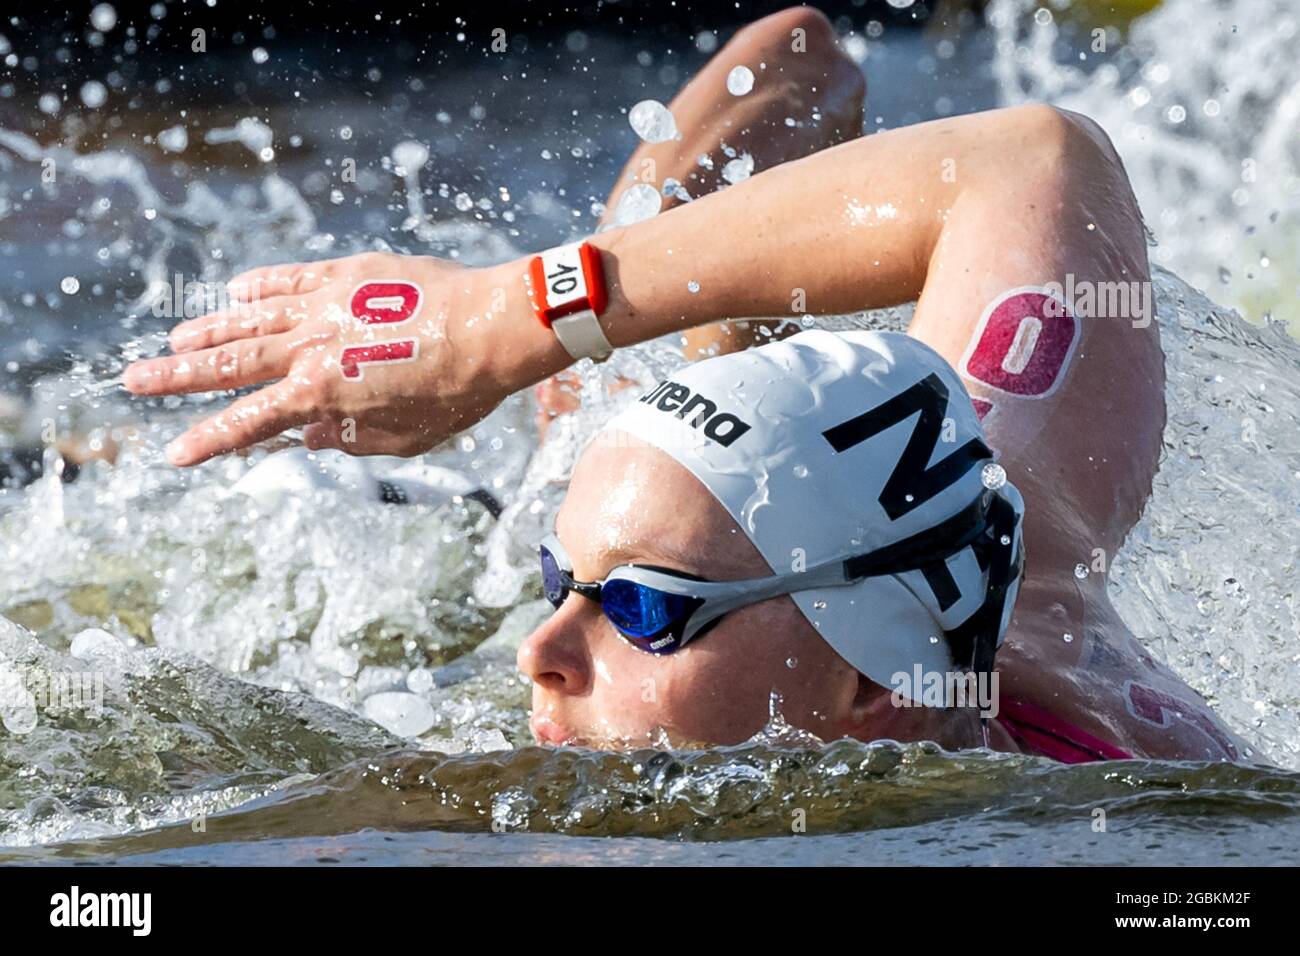 TOKYO, JAPAN - AUGUST 4: van ROUWENDAAL Sharon of the Netherlands competing in the MARATHON SWIMMING - 10KM WOMEN at the Tokyo 2020 Olympic Games  at Odaiba Marine Park on August 4, 2021 in Tokyo, Japan (Photo by Giorgio Scala / Deepbluemedia / Insidefoto/Orange Pictures) Stock Photo